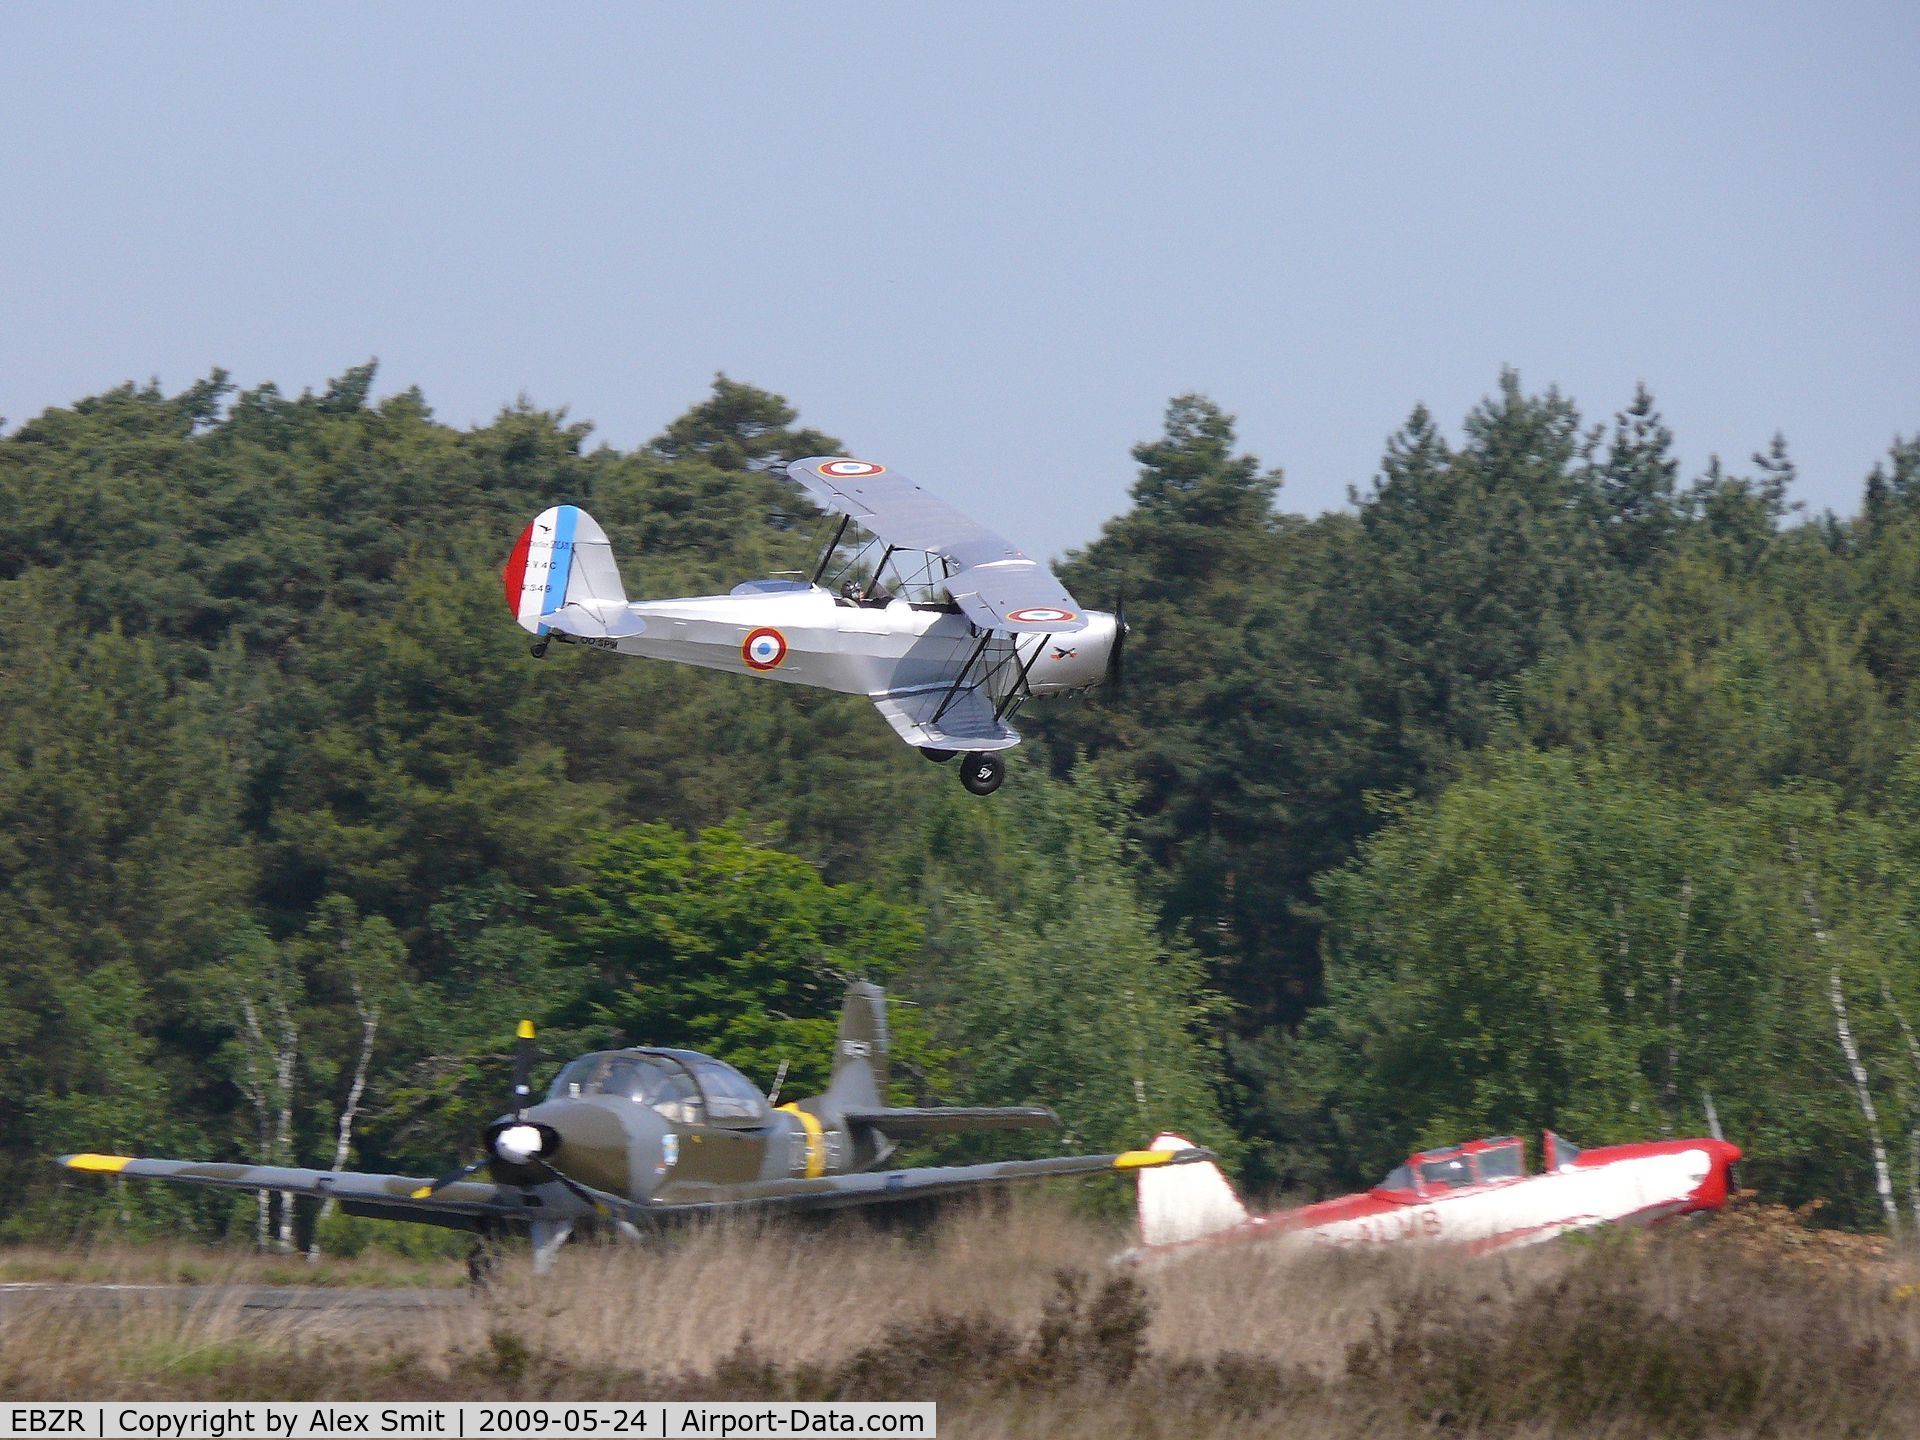 Oostmalle AB Airport, Zoersel Belgium (EBZR) - Chipmeet 2009 under attack by a Stampe